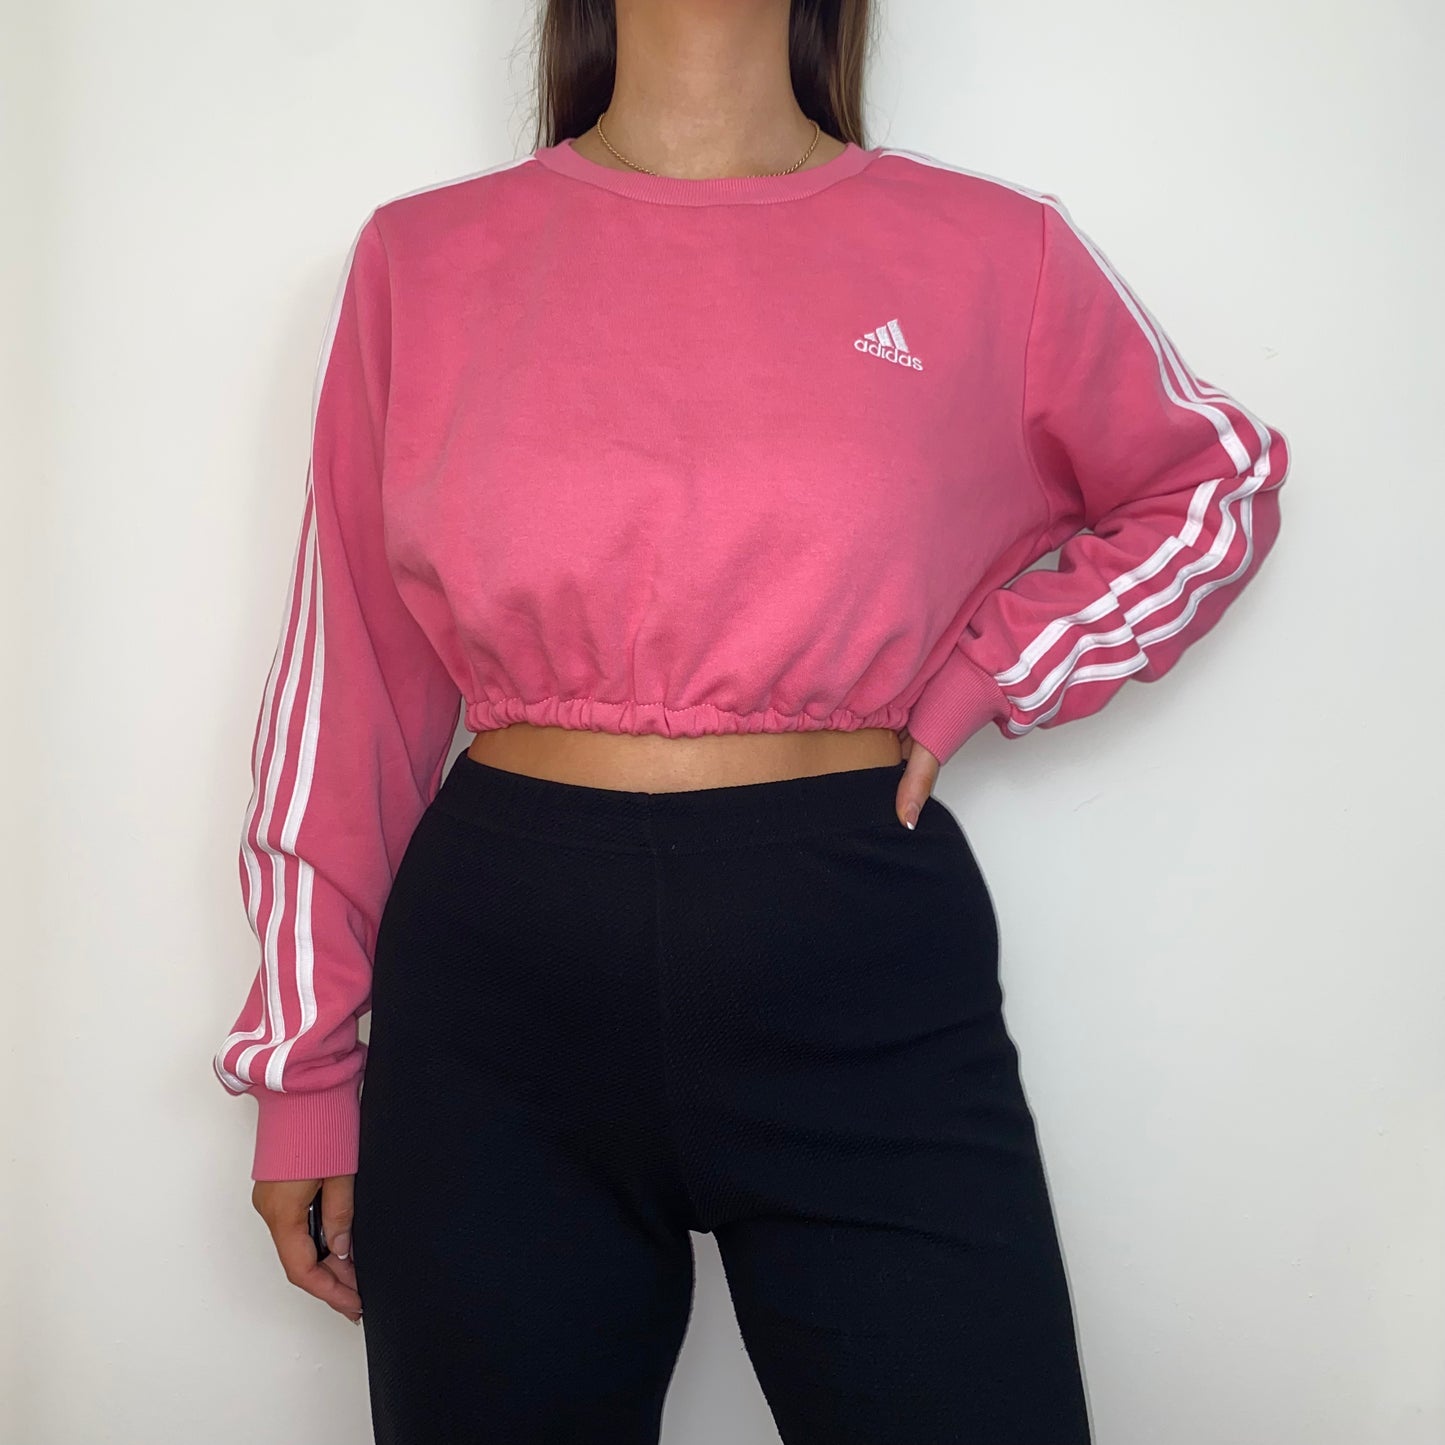 pink adidas cropped sweatshirt with white adidas logo shown on a model wearing black trousers with hand on hip